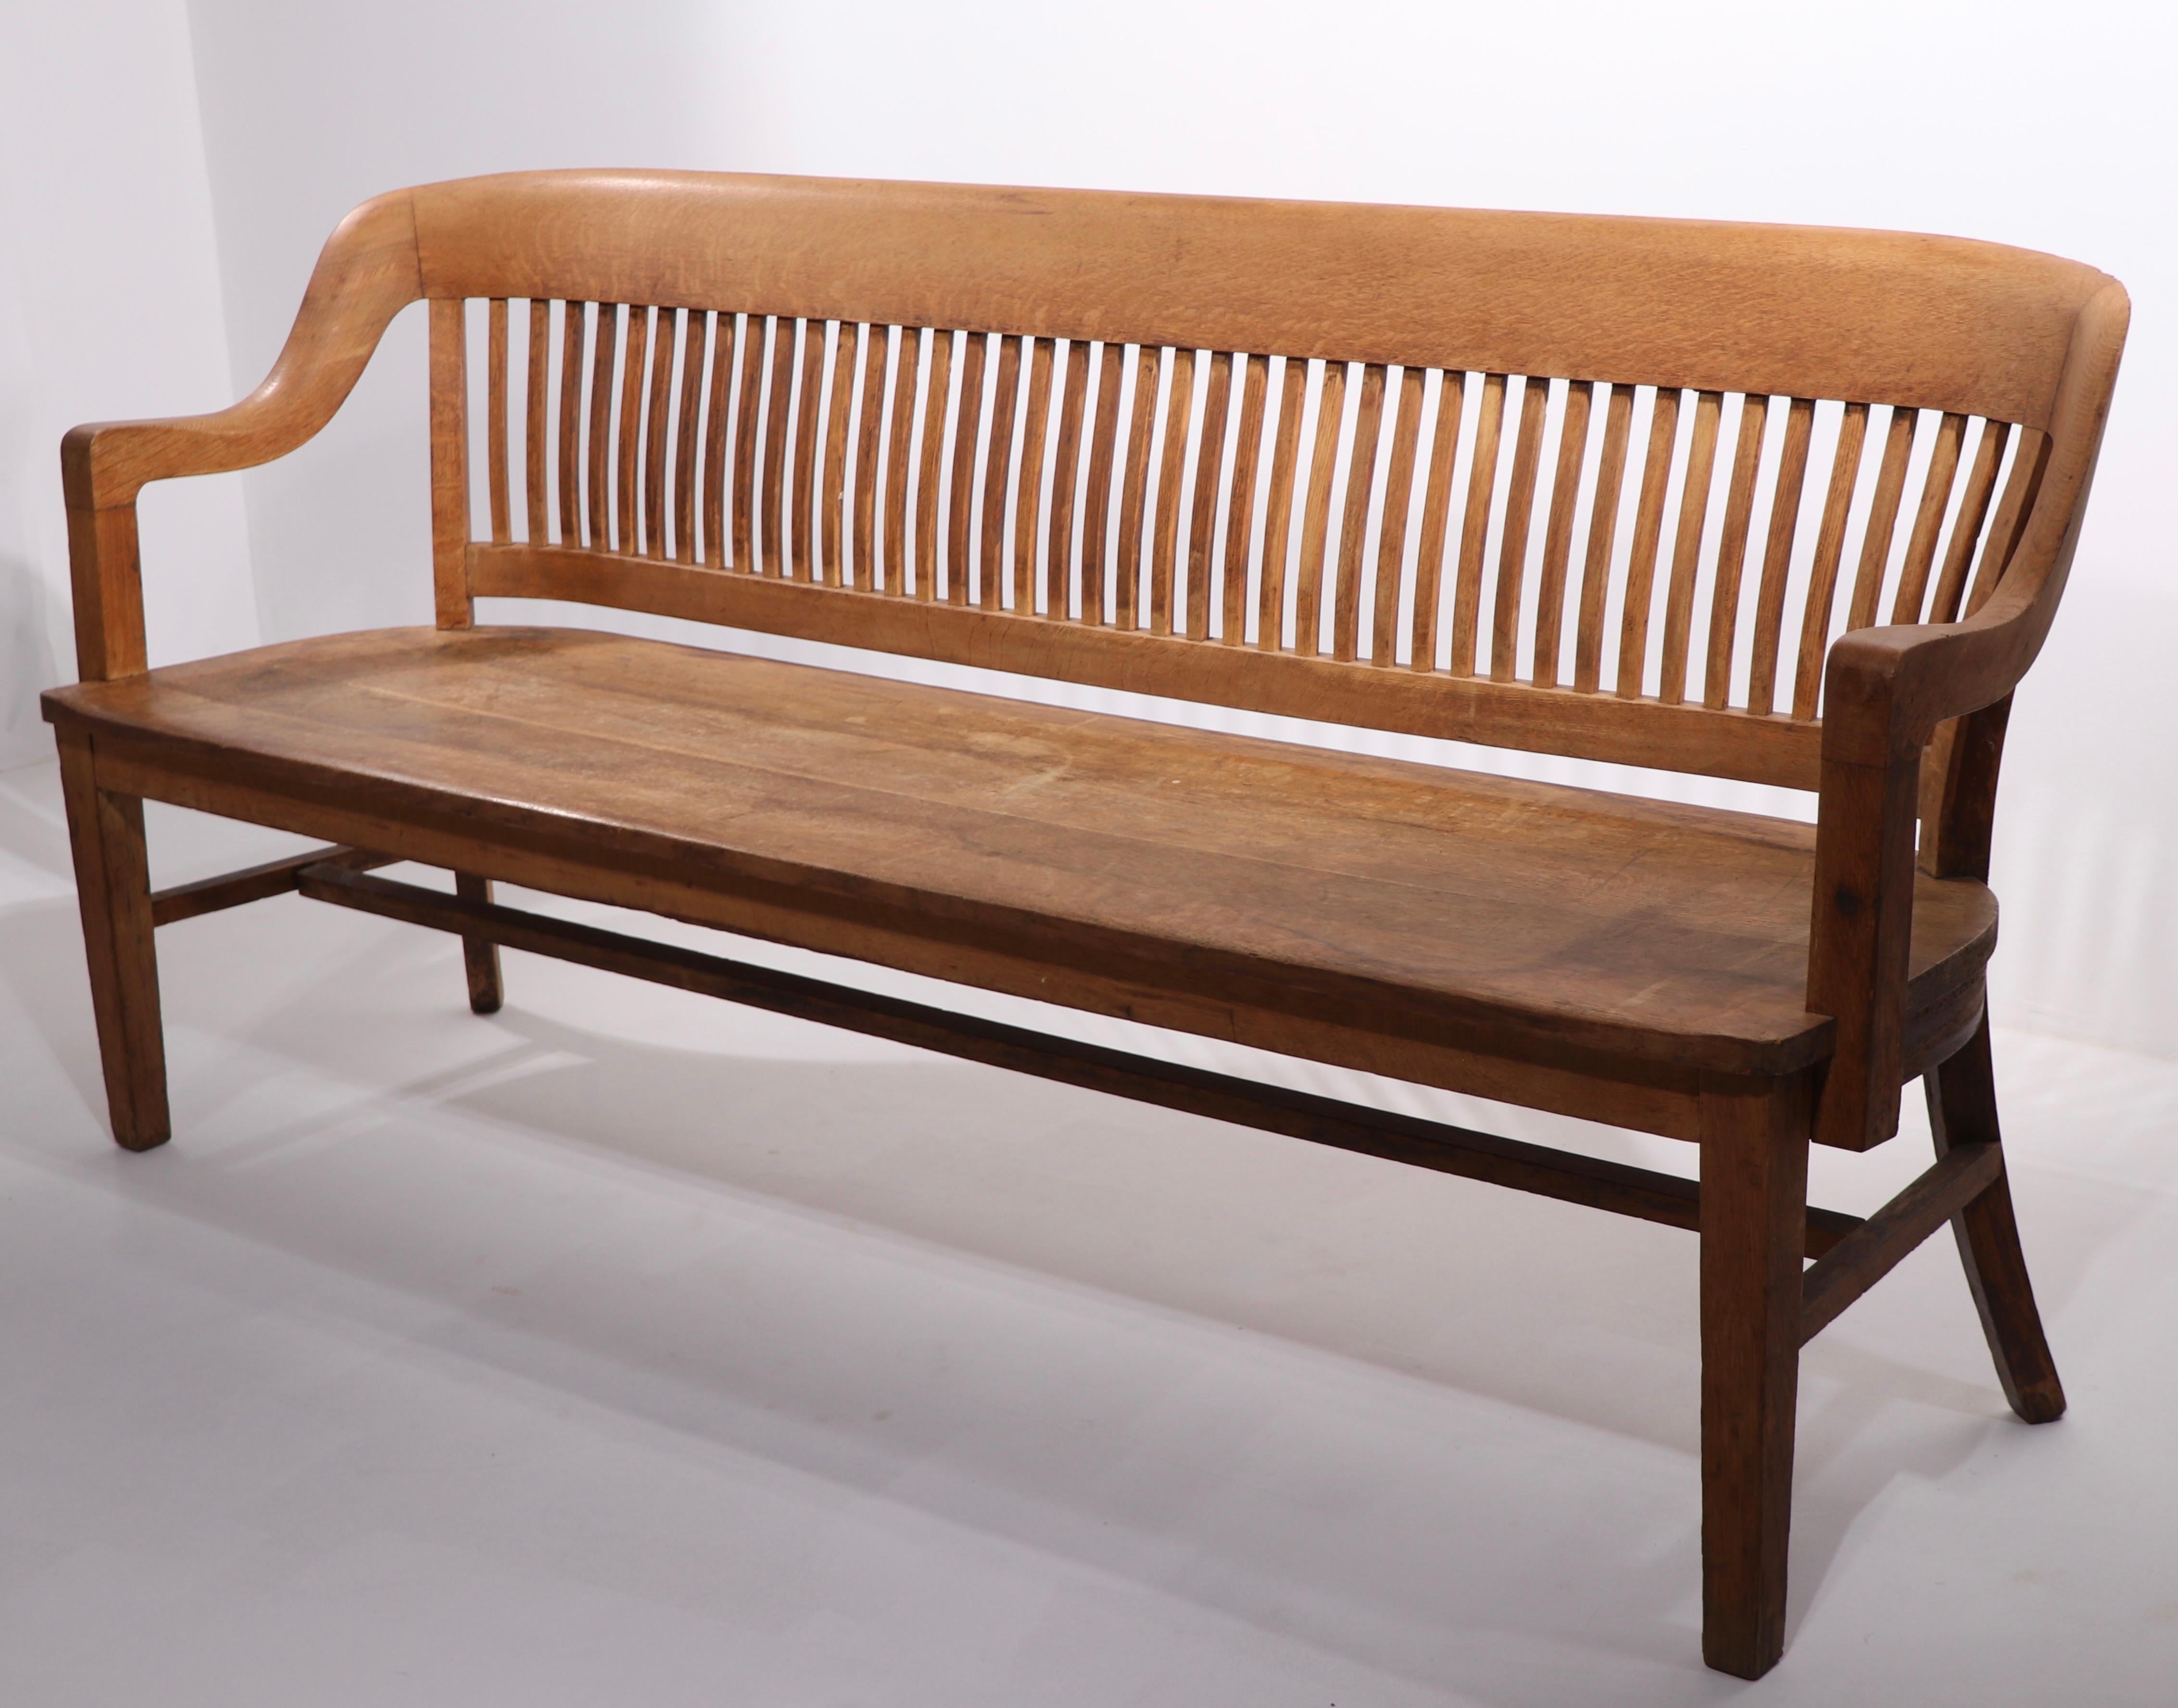 Classic courthouse bench by Gunlocke. This iconic American / English form will fit with Traditional, Industrial, or Modern interior spaces. This example is structurally sound and sturdy, it shows cosmetic wear to the finish, normal and consistent